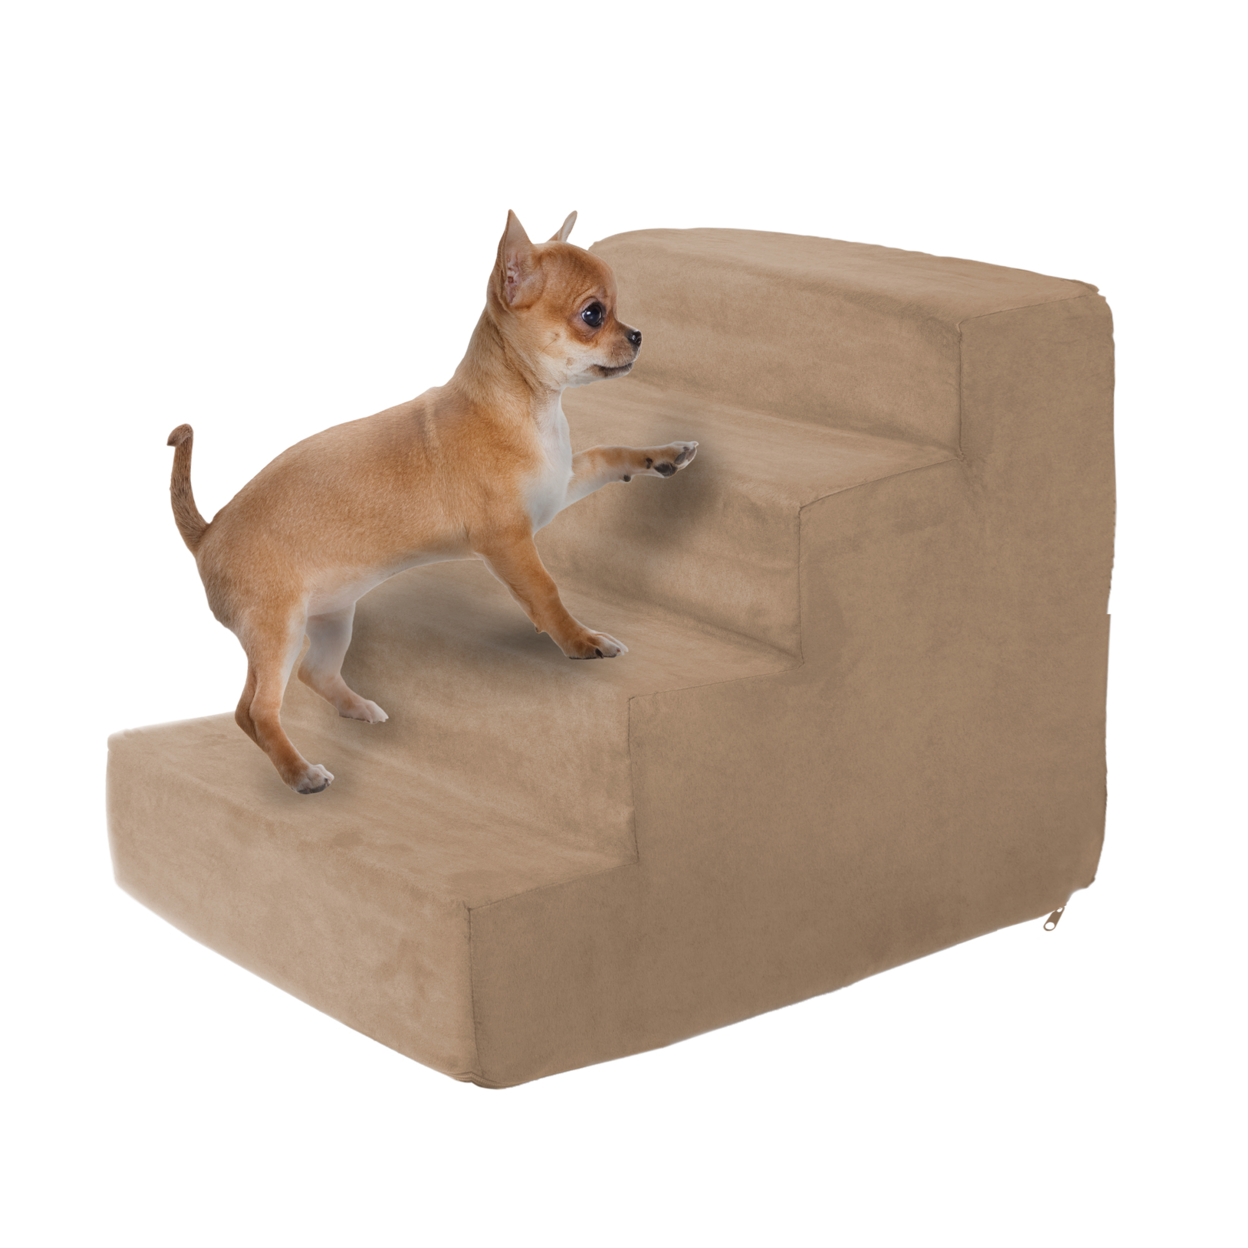 4 Steps High Density Foam Pet Stairs Removable Washable Zipper Cover 15 Inches High Small Dogs Tan